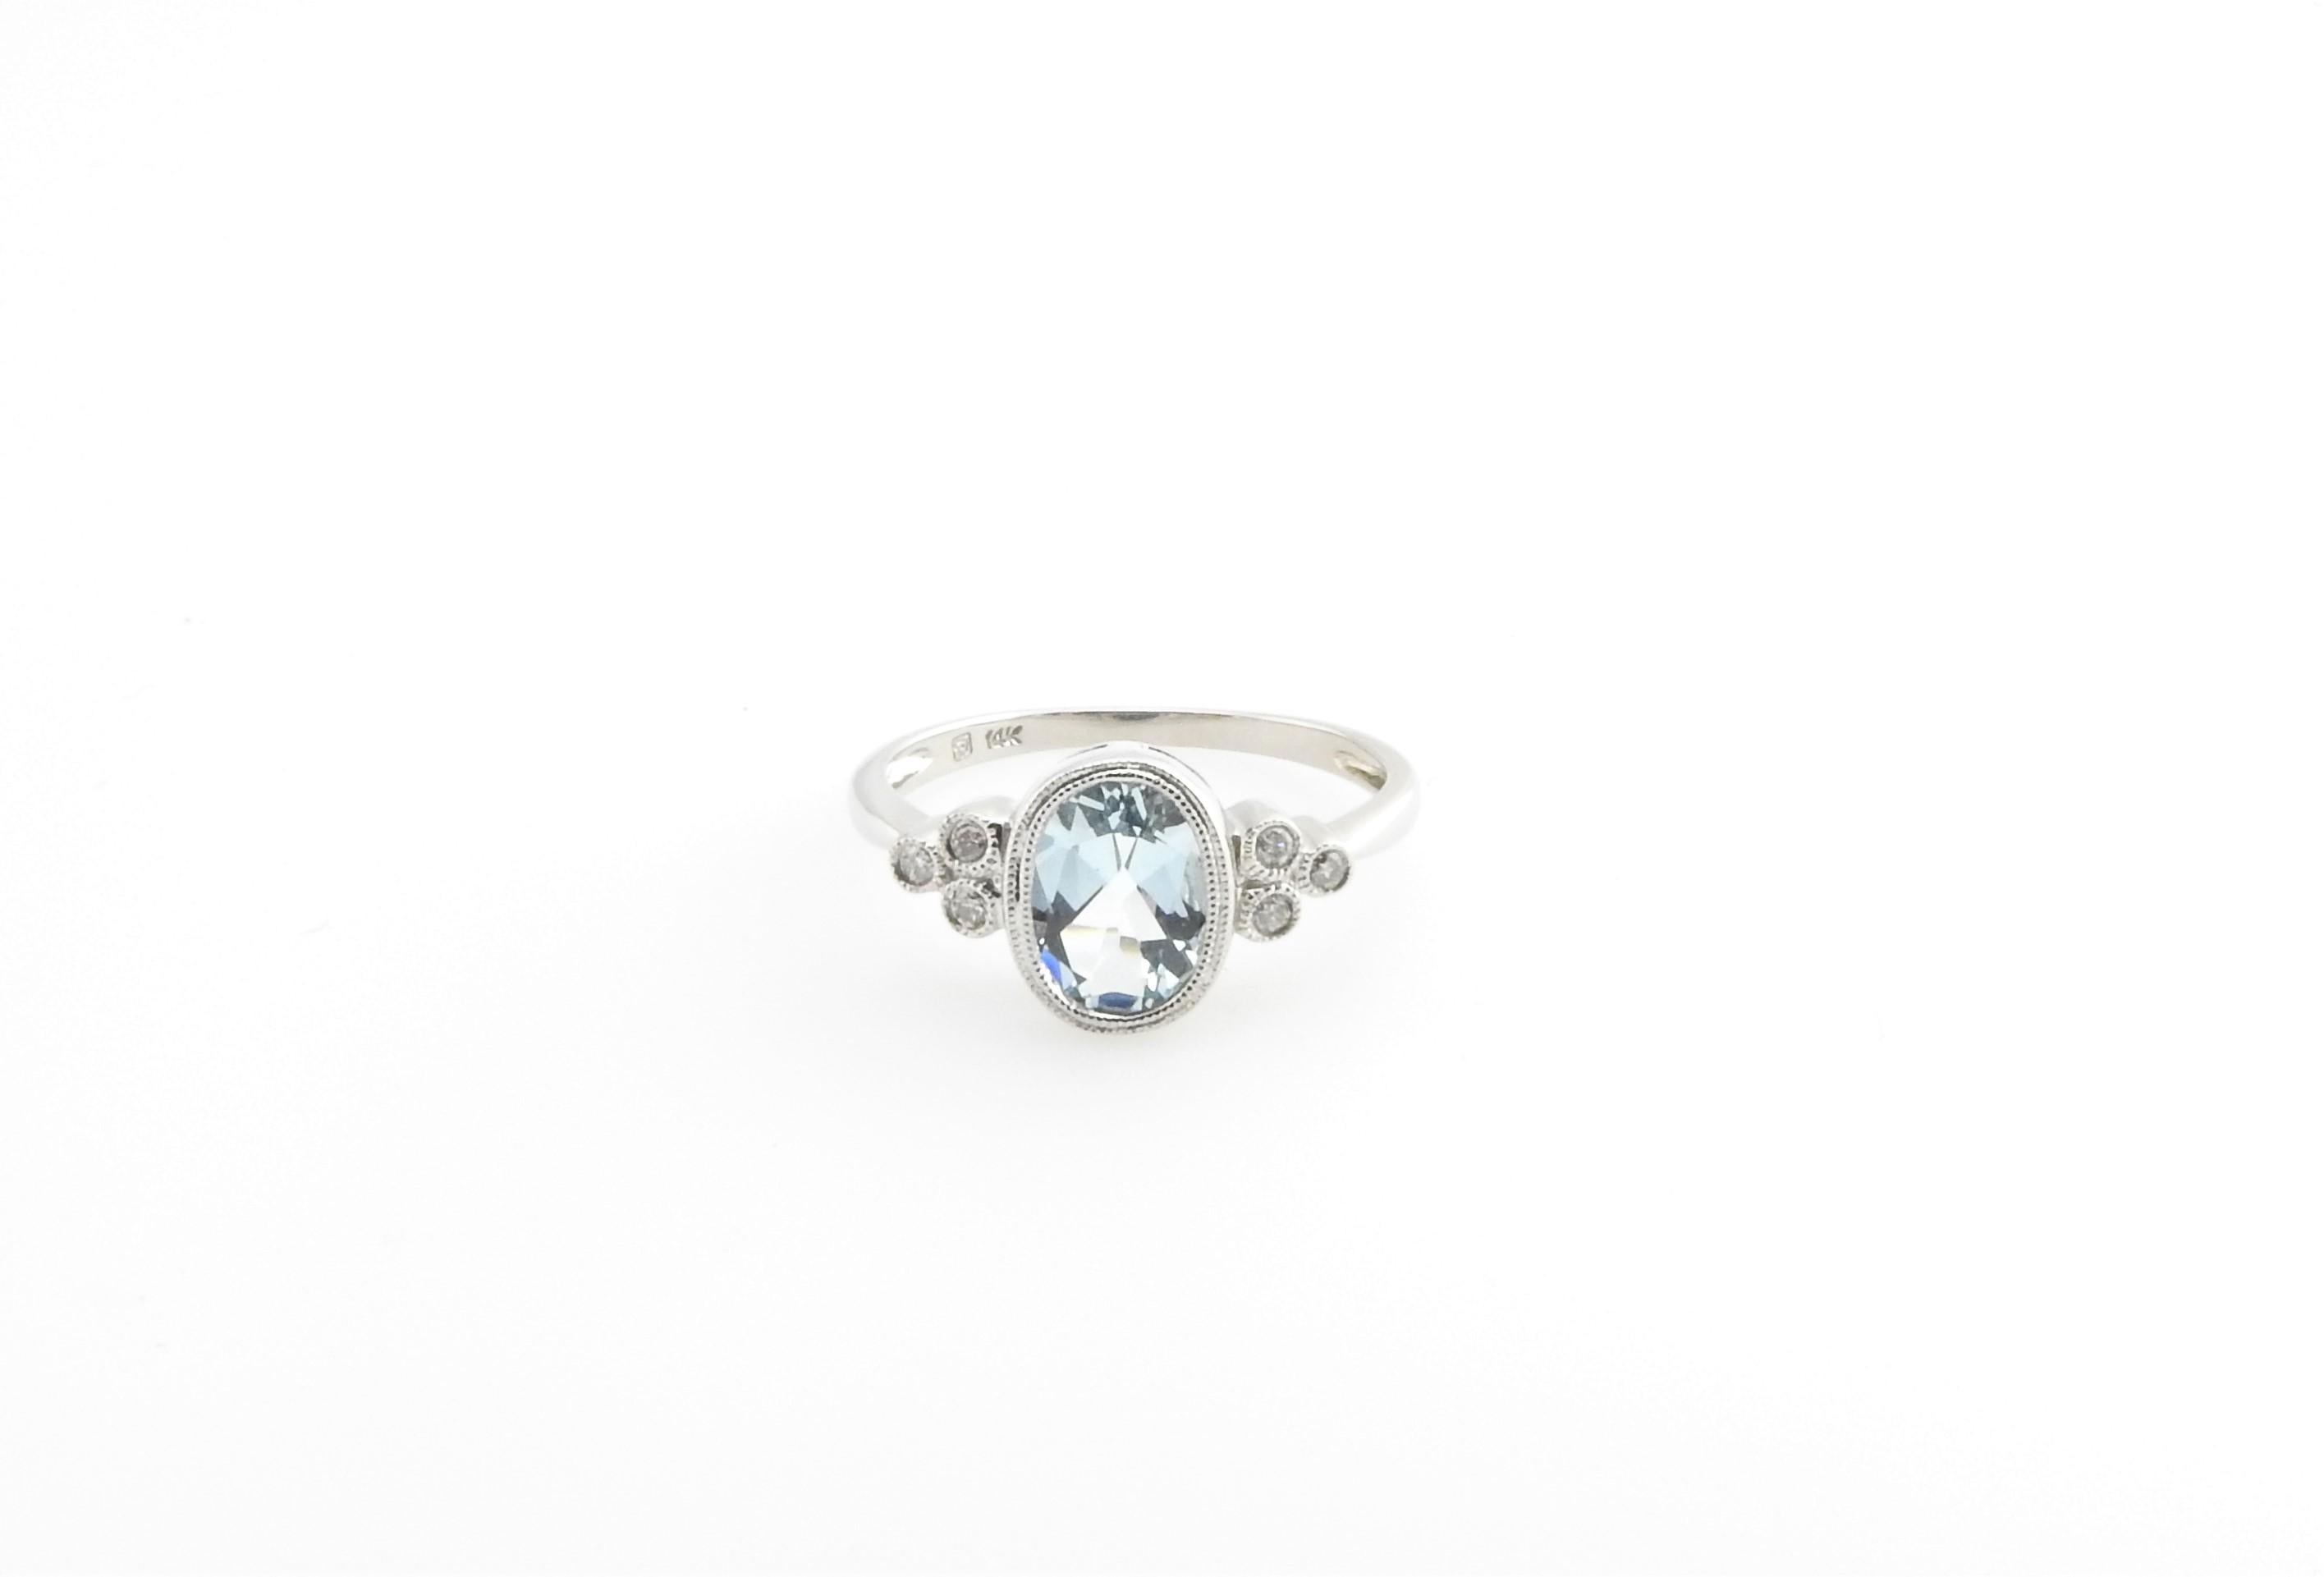 Vintage 14 Karat White Gold Blue Topaz and Diamond Ring Size 7.25

This lovely ring features one oval blue topaz 8 mm x 6 mm and six round brilliant cut diamonds set in beautifully detailed 14K white gold. Shank: 1.5 mm.

Approximate total diamond